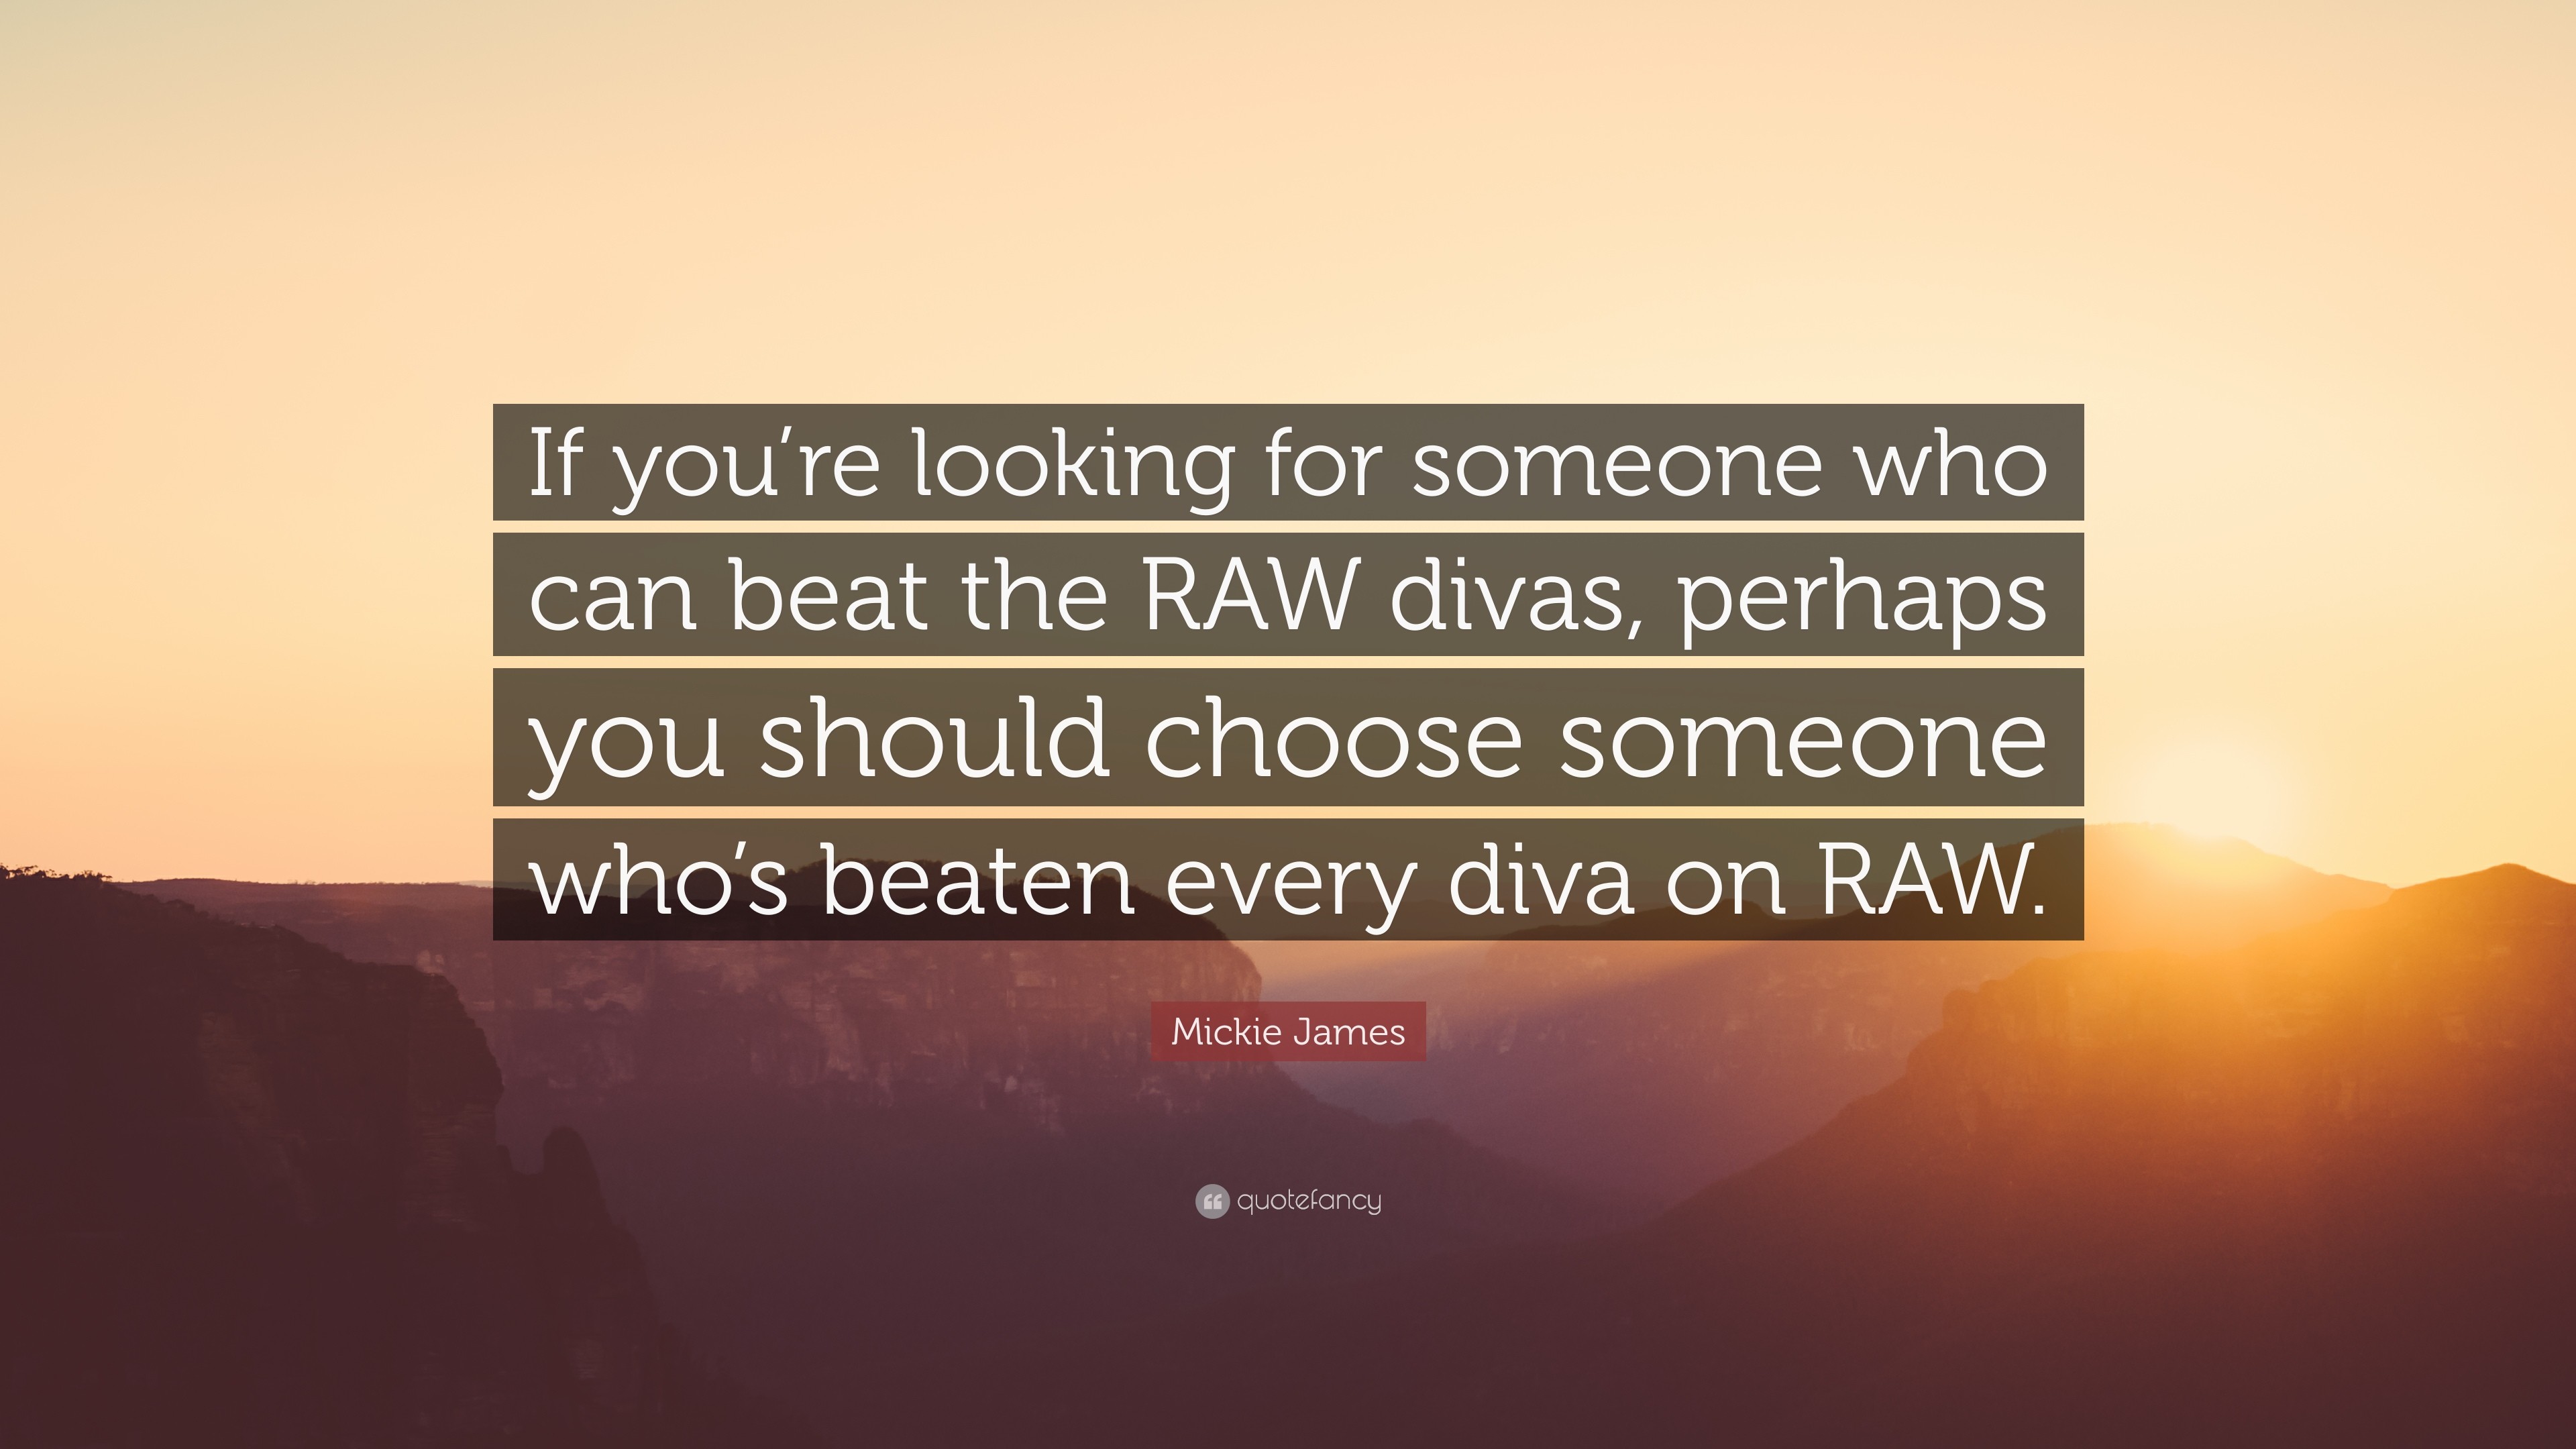 3840x2160 Mickie James Quote: “If you're looking for someone who can beat the